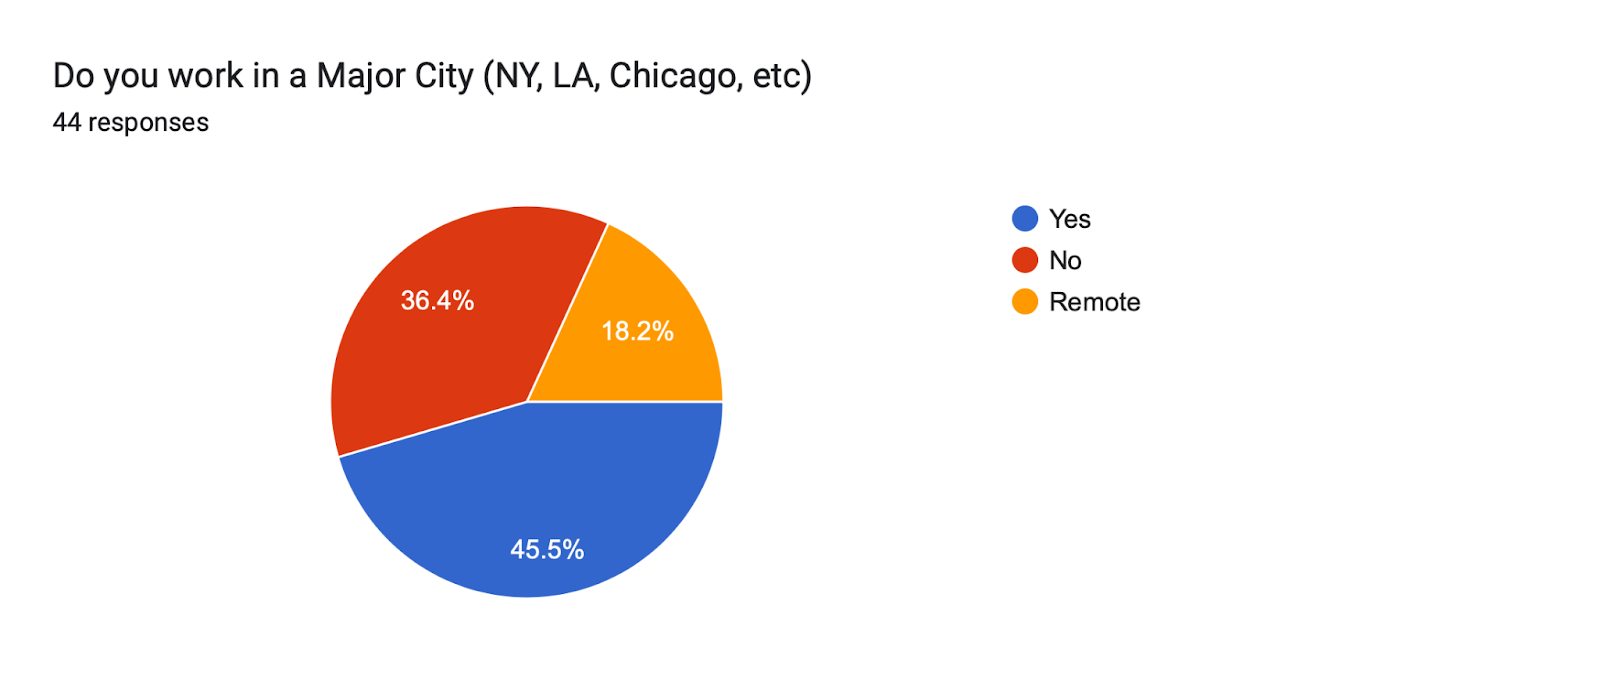 Forms response chart. Question title: Do you work in a Major City (NY, LA, Chicago, etc) . Number of responses: 44 responses.